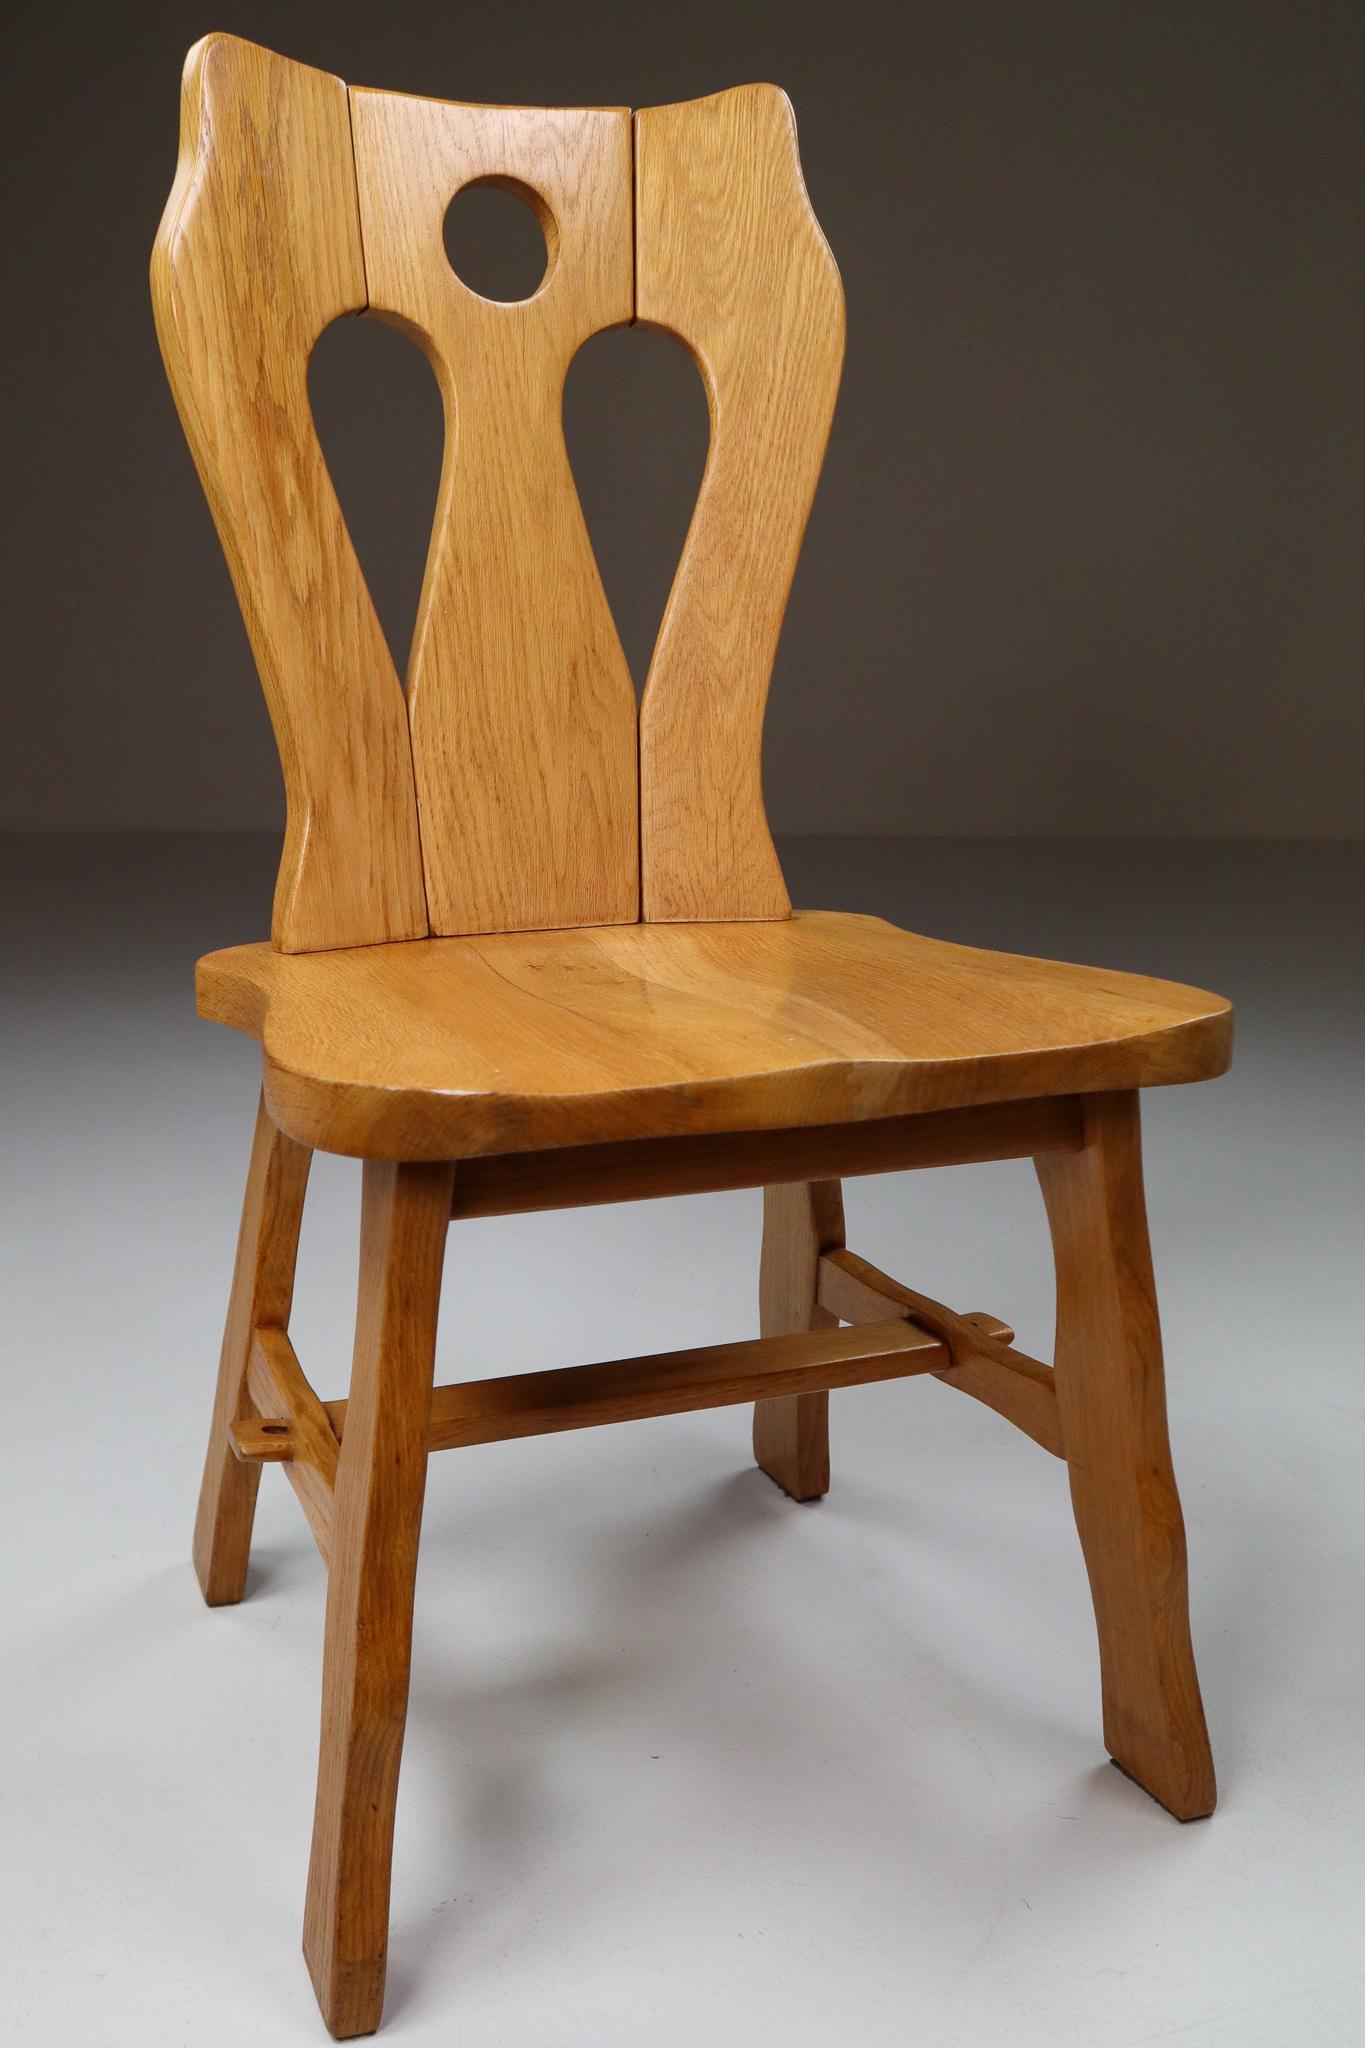 Belgian Set of Four Brutalist Chairs in Blond Oak, Belgium, 1960s For Sale